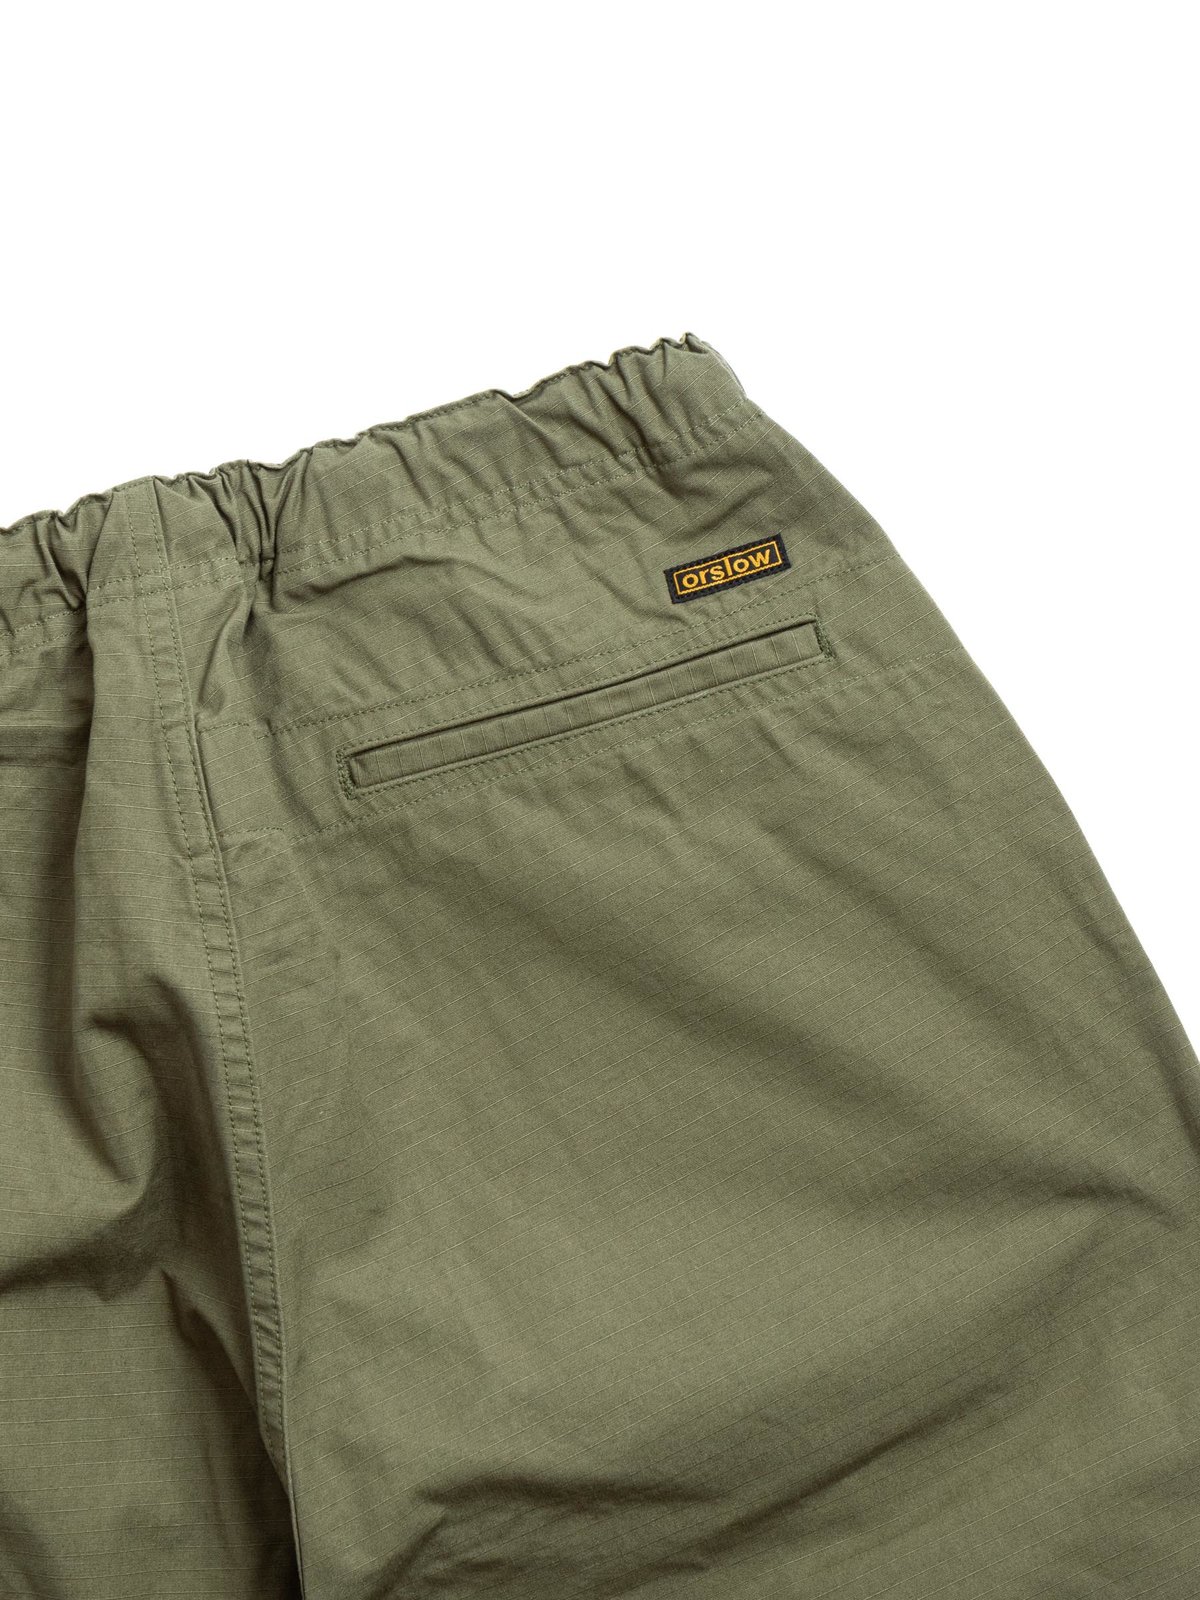 NEW YORKER PANT ARMY RIPSTOP by orSlow – The Bureau Belfast - The ...